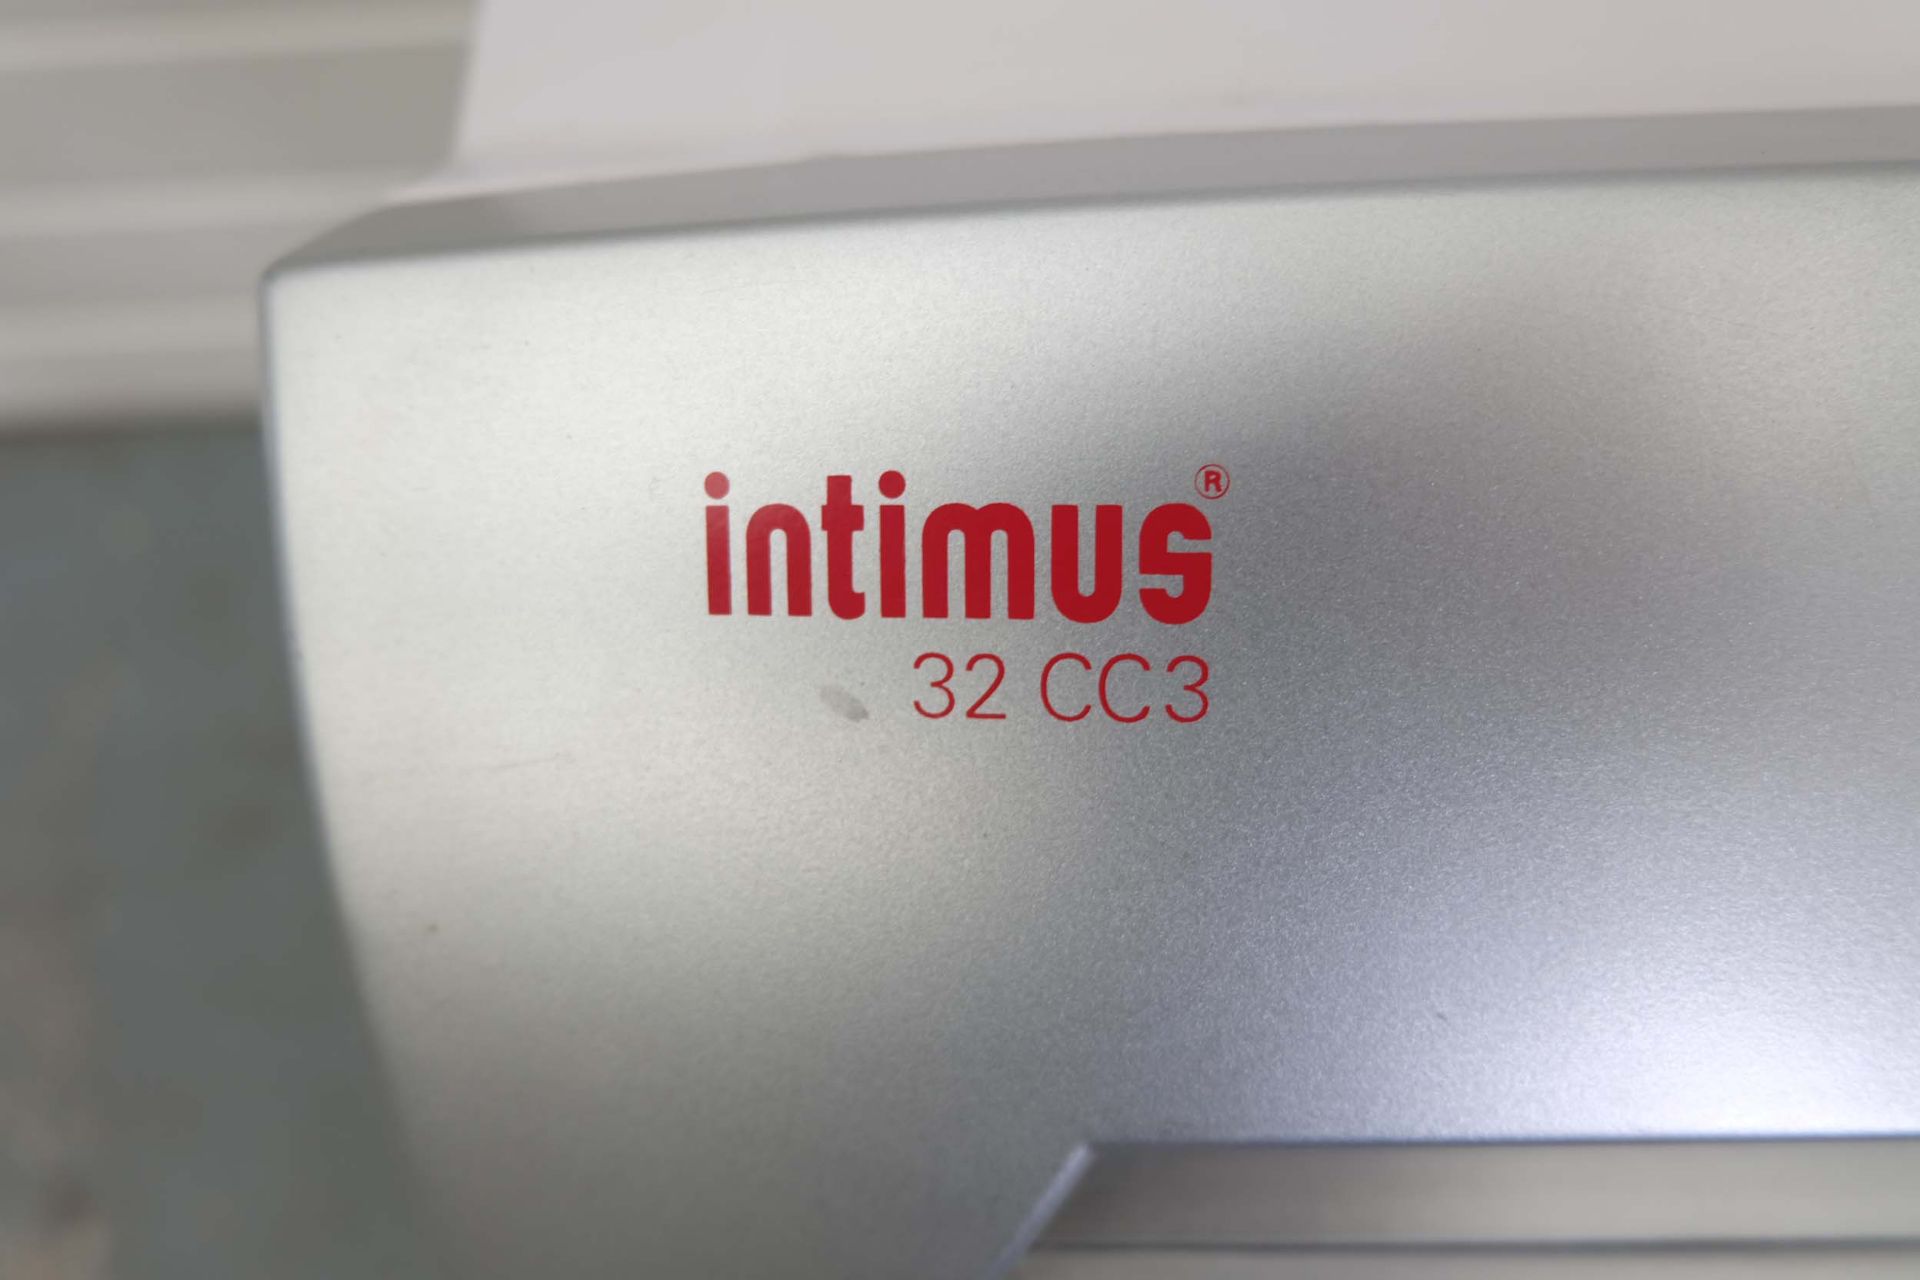 Martin Yale Model Intimus 32CC3 Cross Cut Shredder for Paper, CD's & Credit Cards. Year 2009. - Image 3 of 5